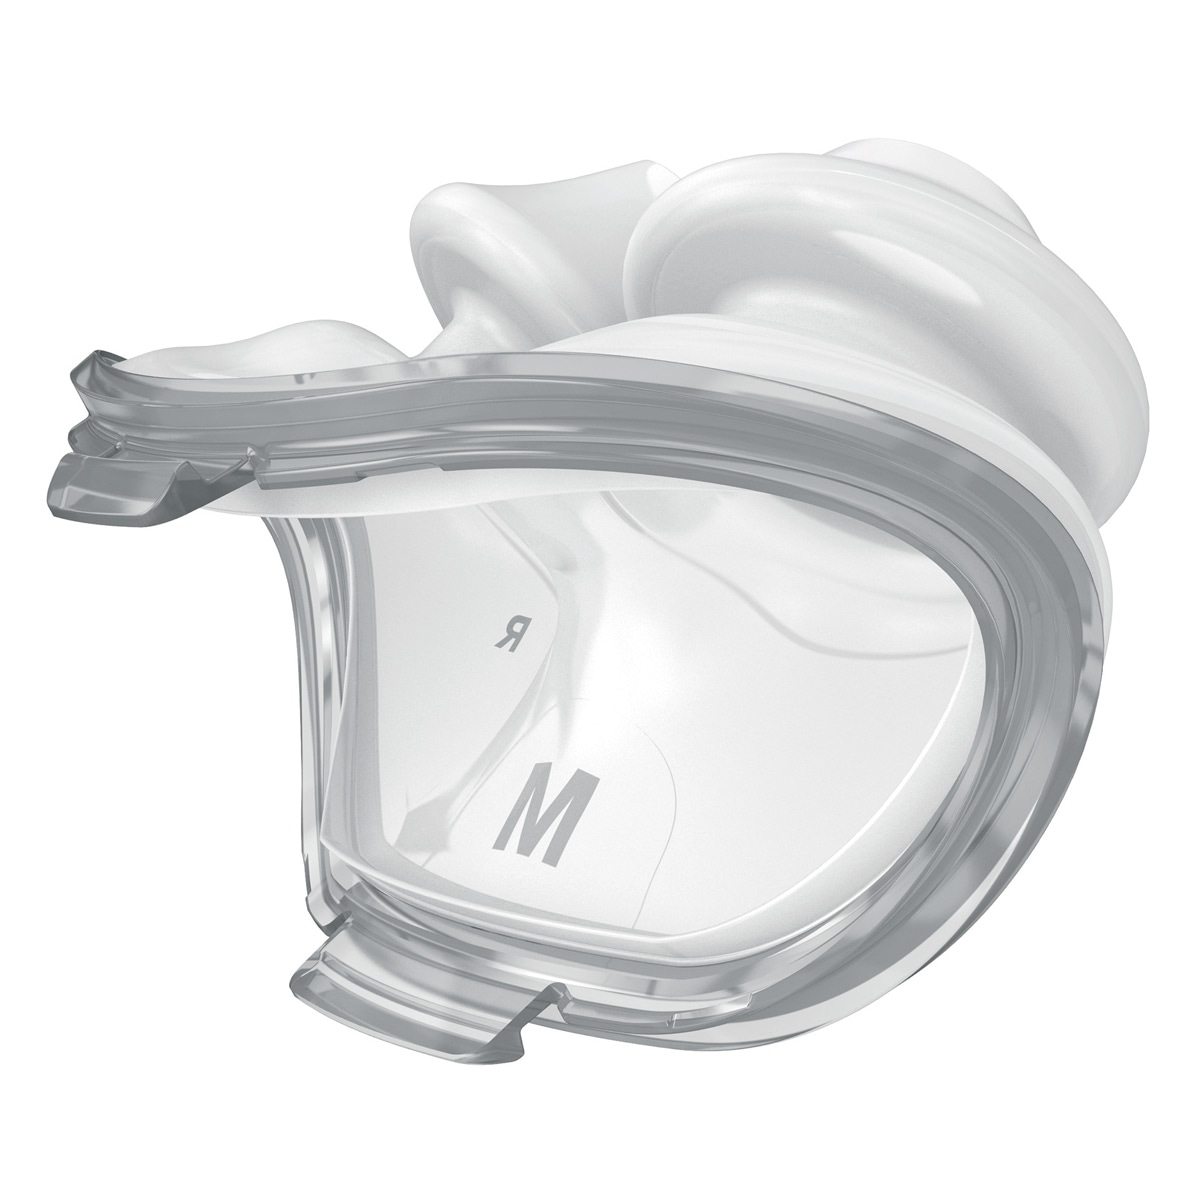 Nasal Pillows for AirFit P10 Series CPAP Masks (TEMPORARILY UNAVAILABLE)